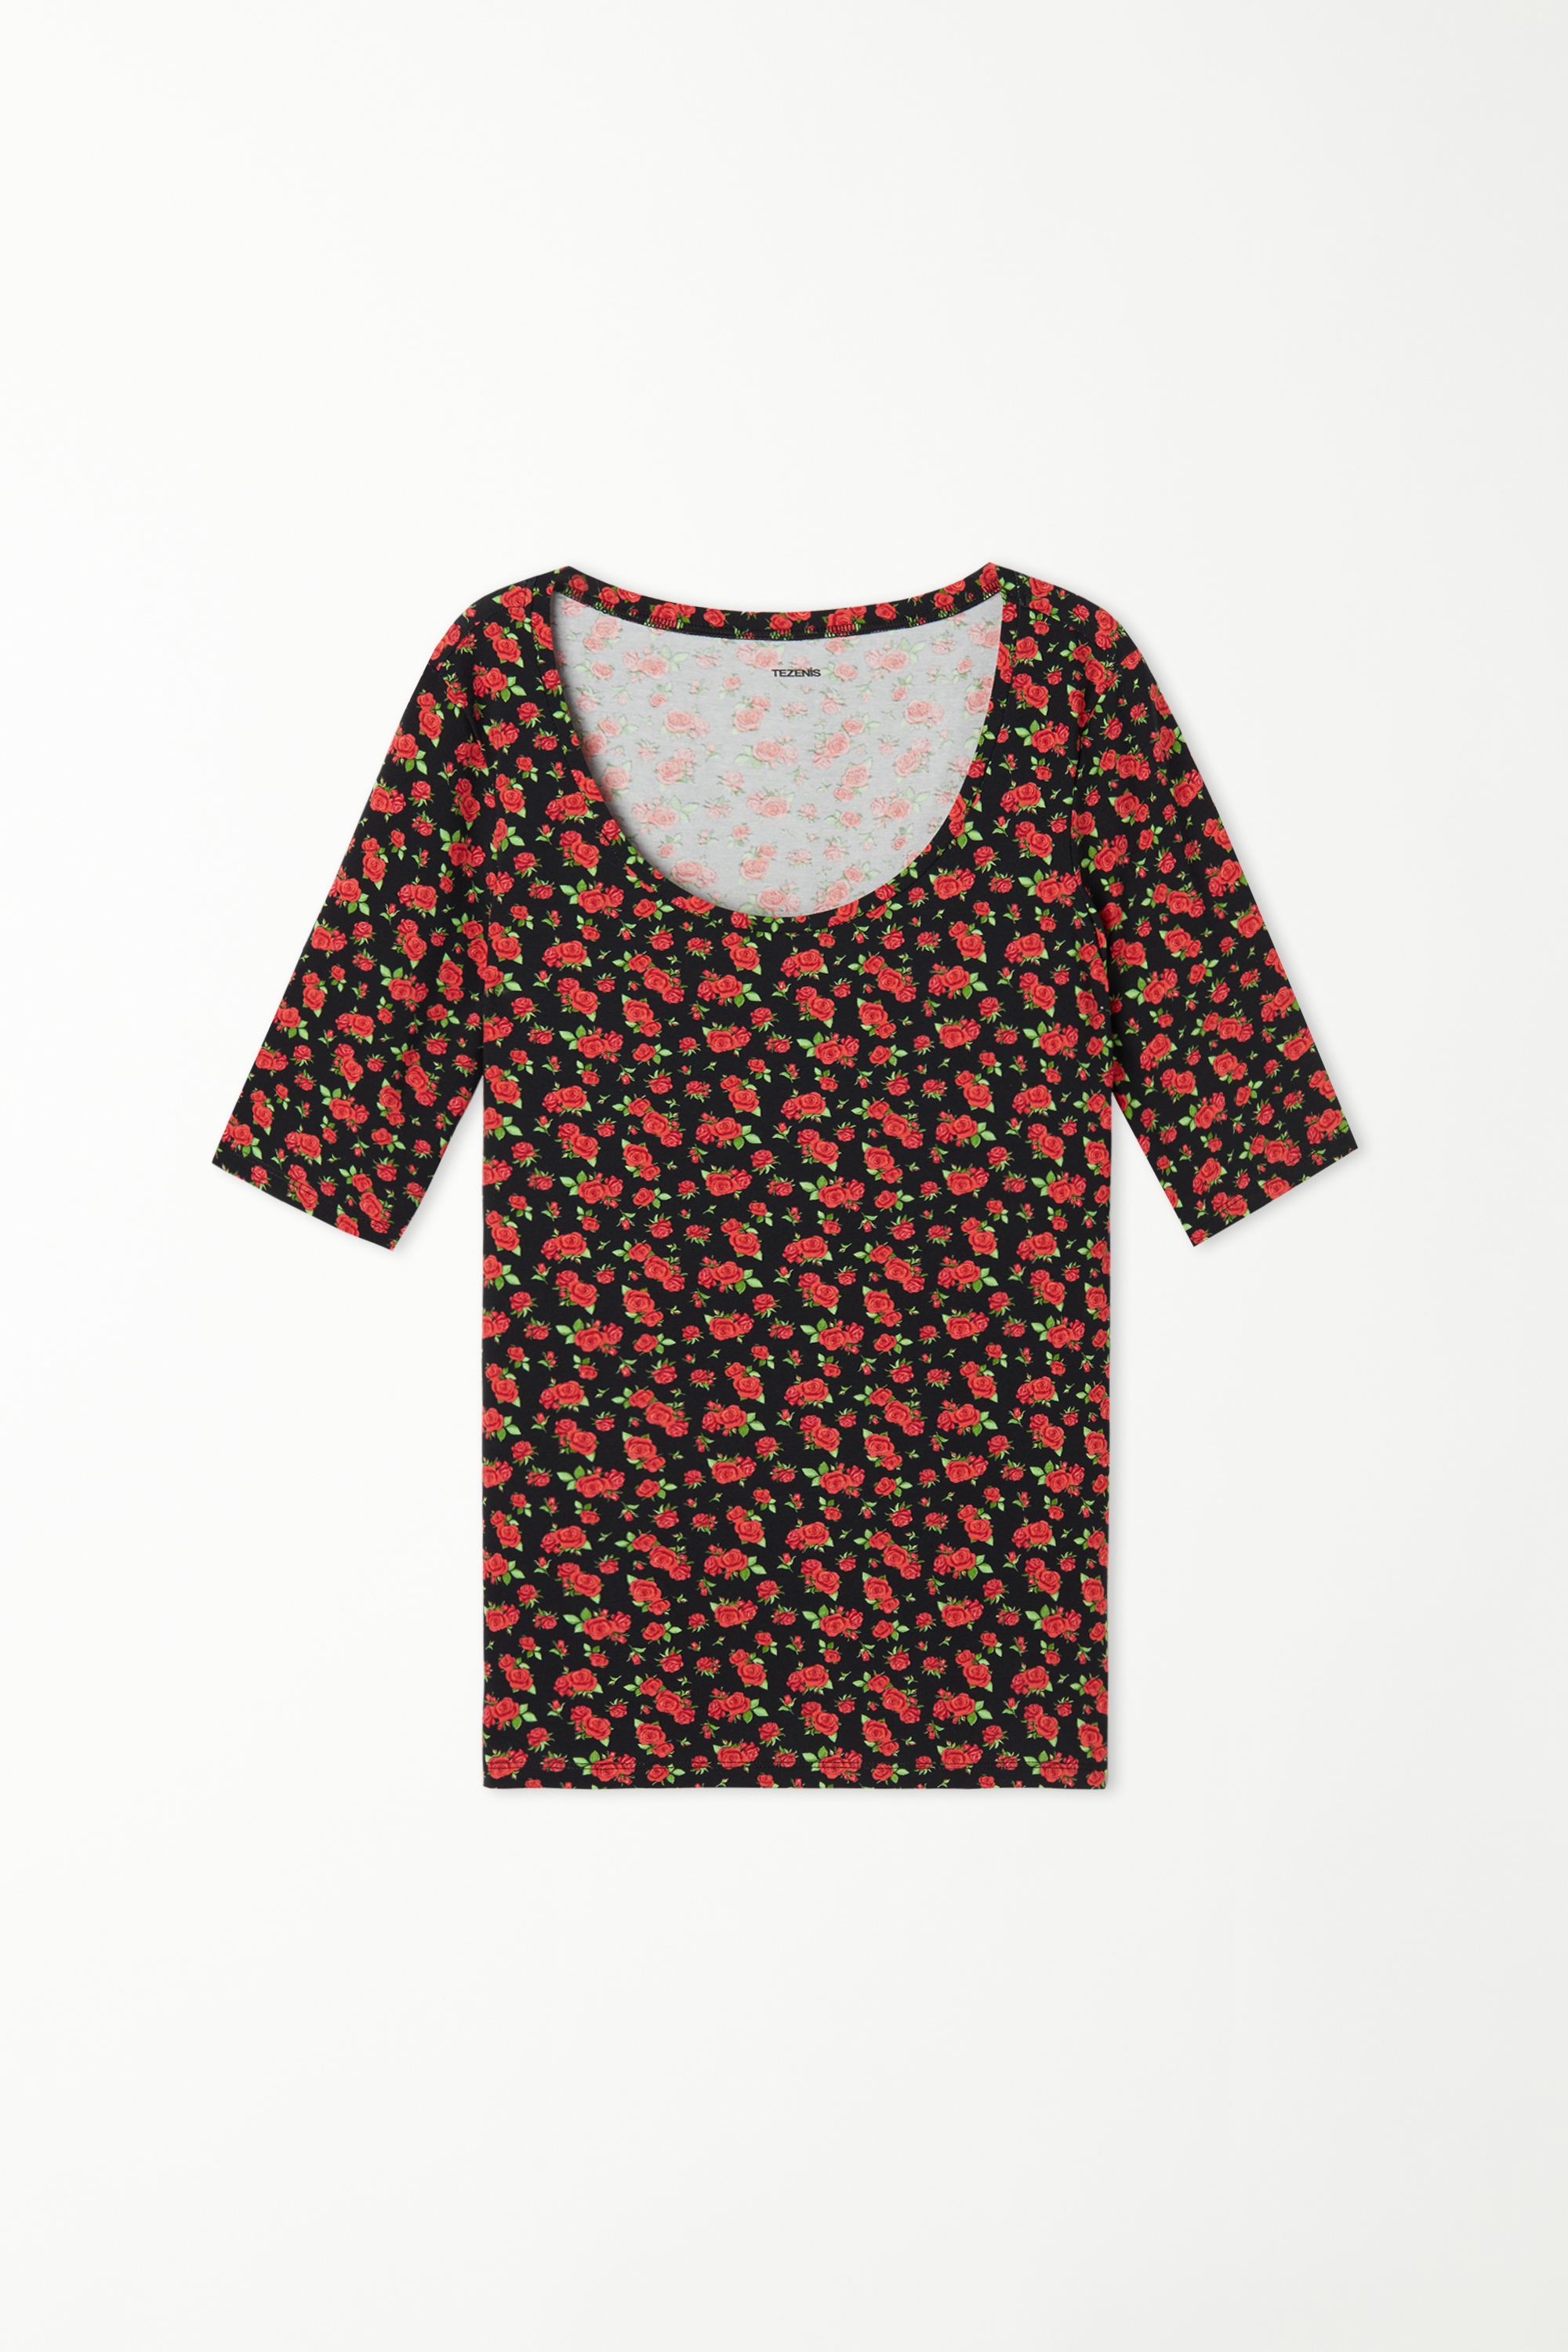 Wide Neck Short Sleeve Printed Cotton Top